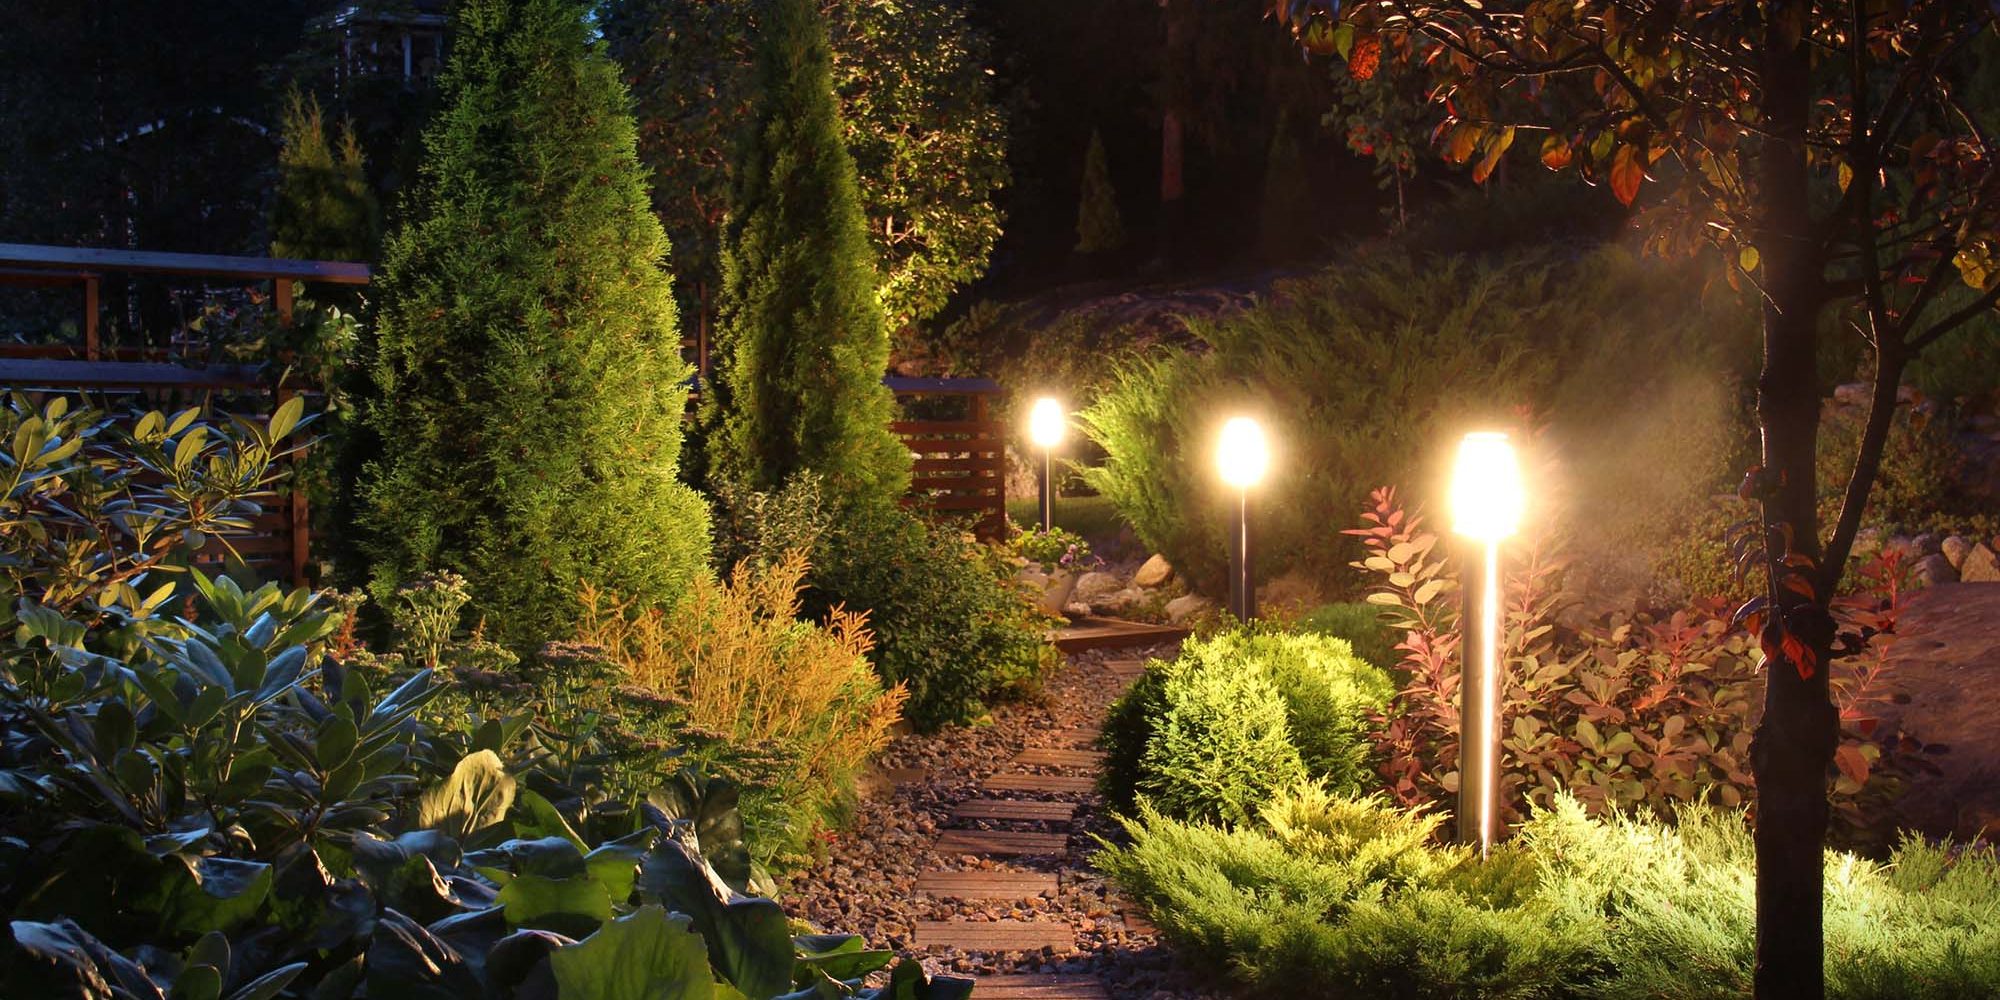 Illuminated home garden path patio lights and plants in evening dusk